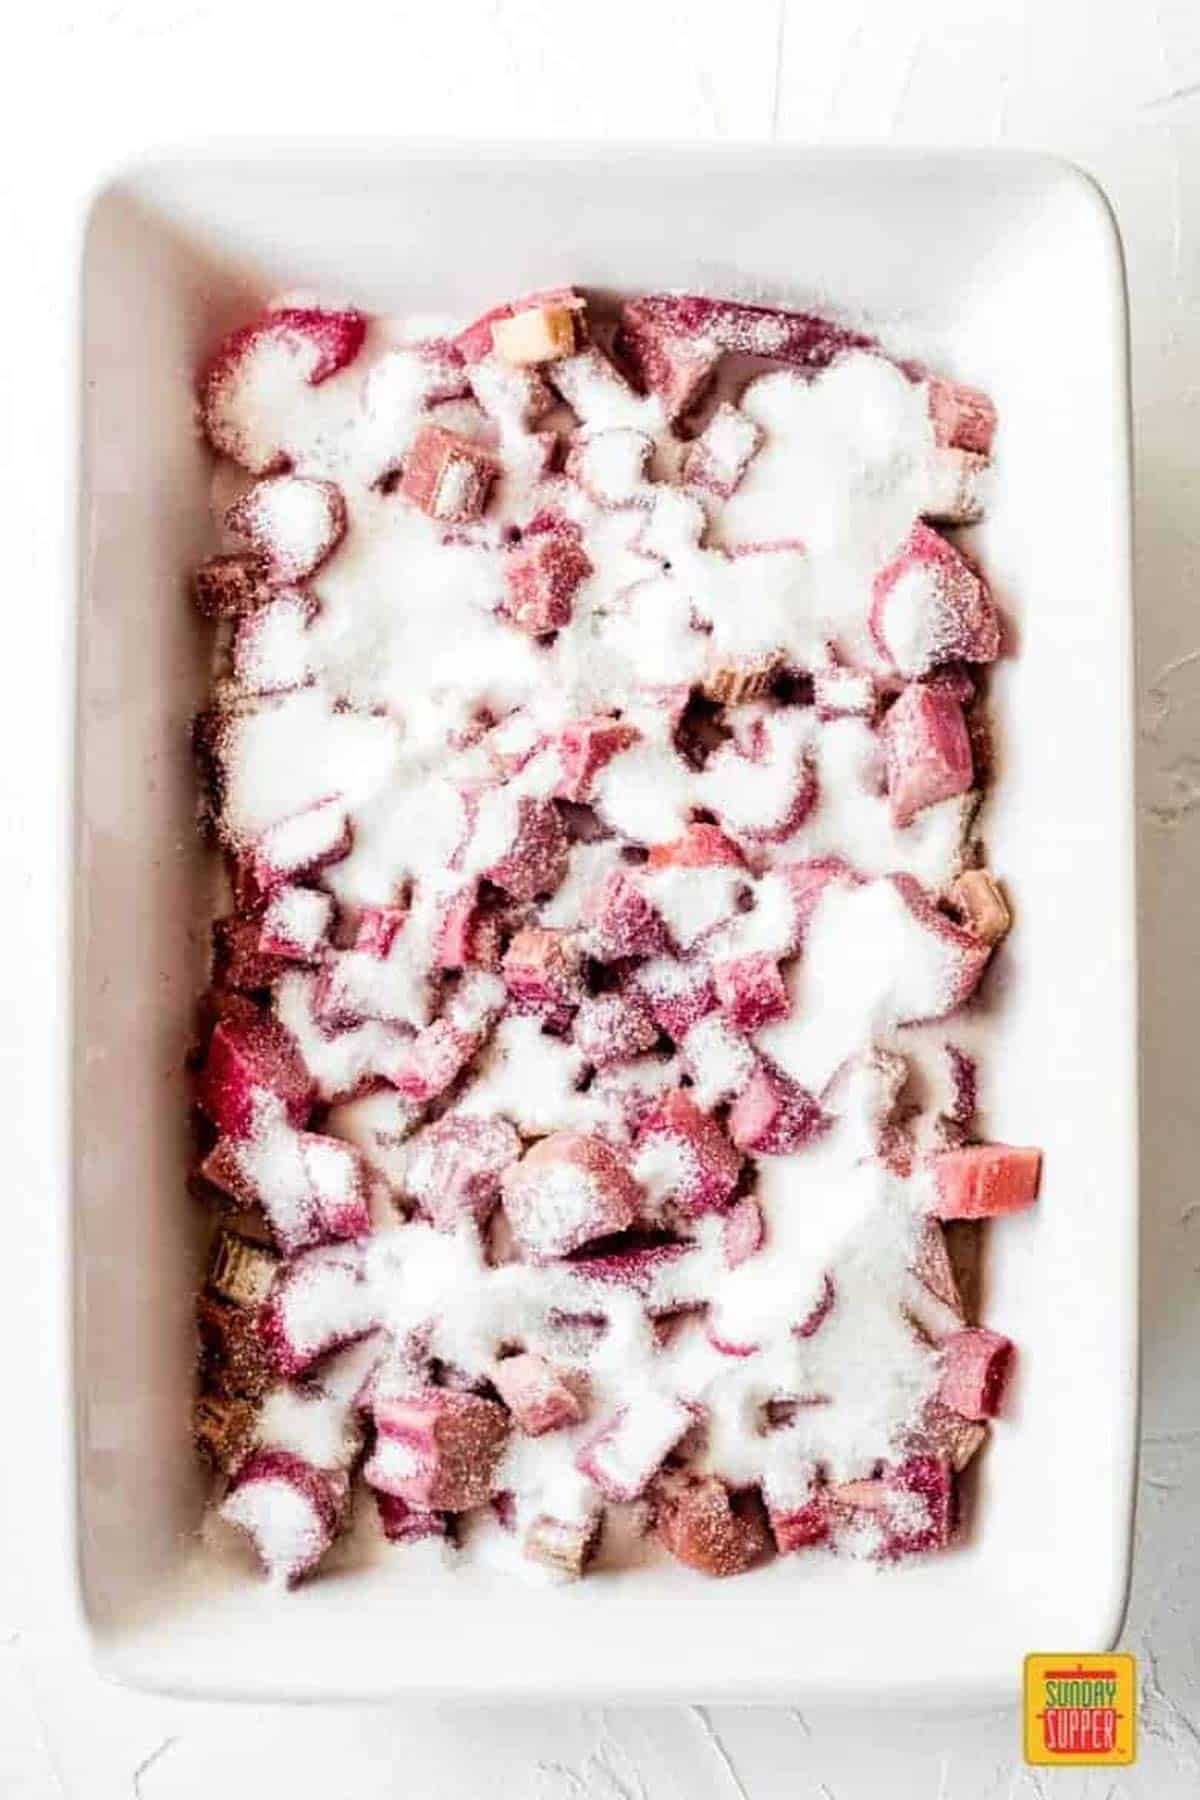 Sugar poured over the rhubarb slices in a white baking dish